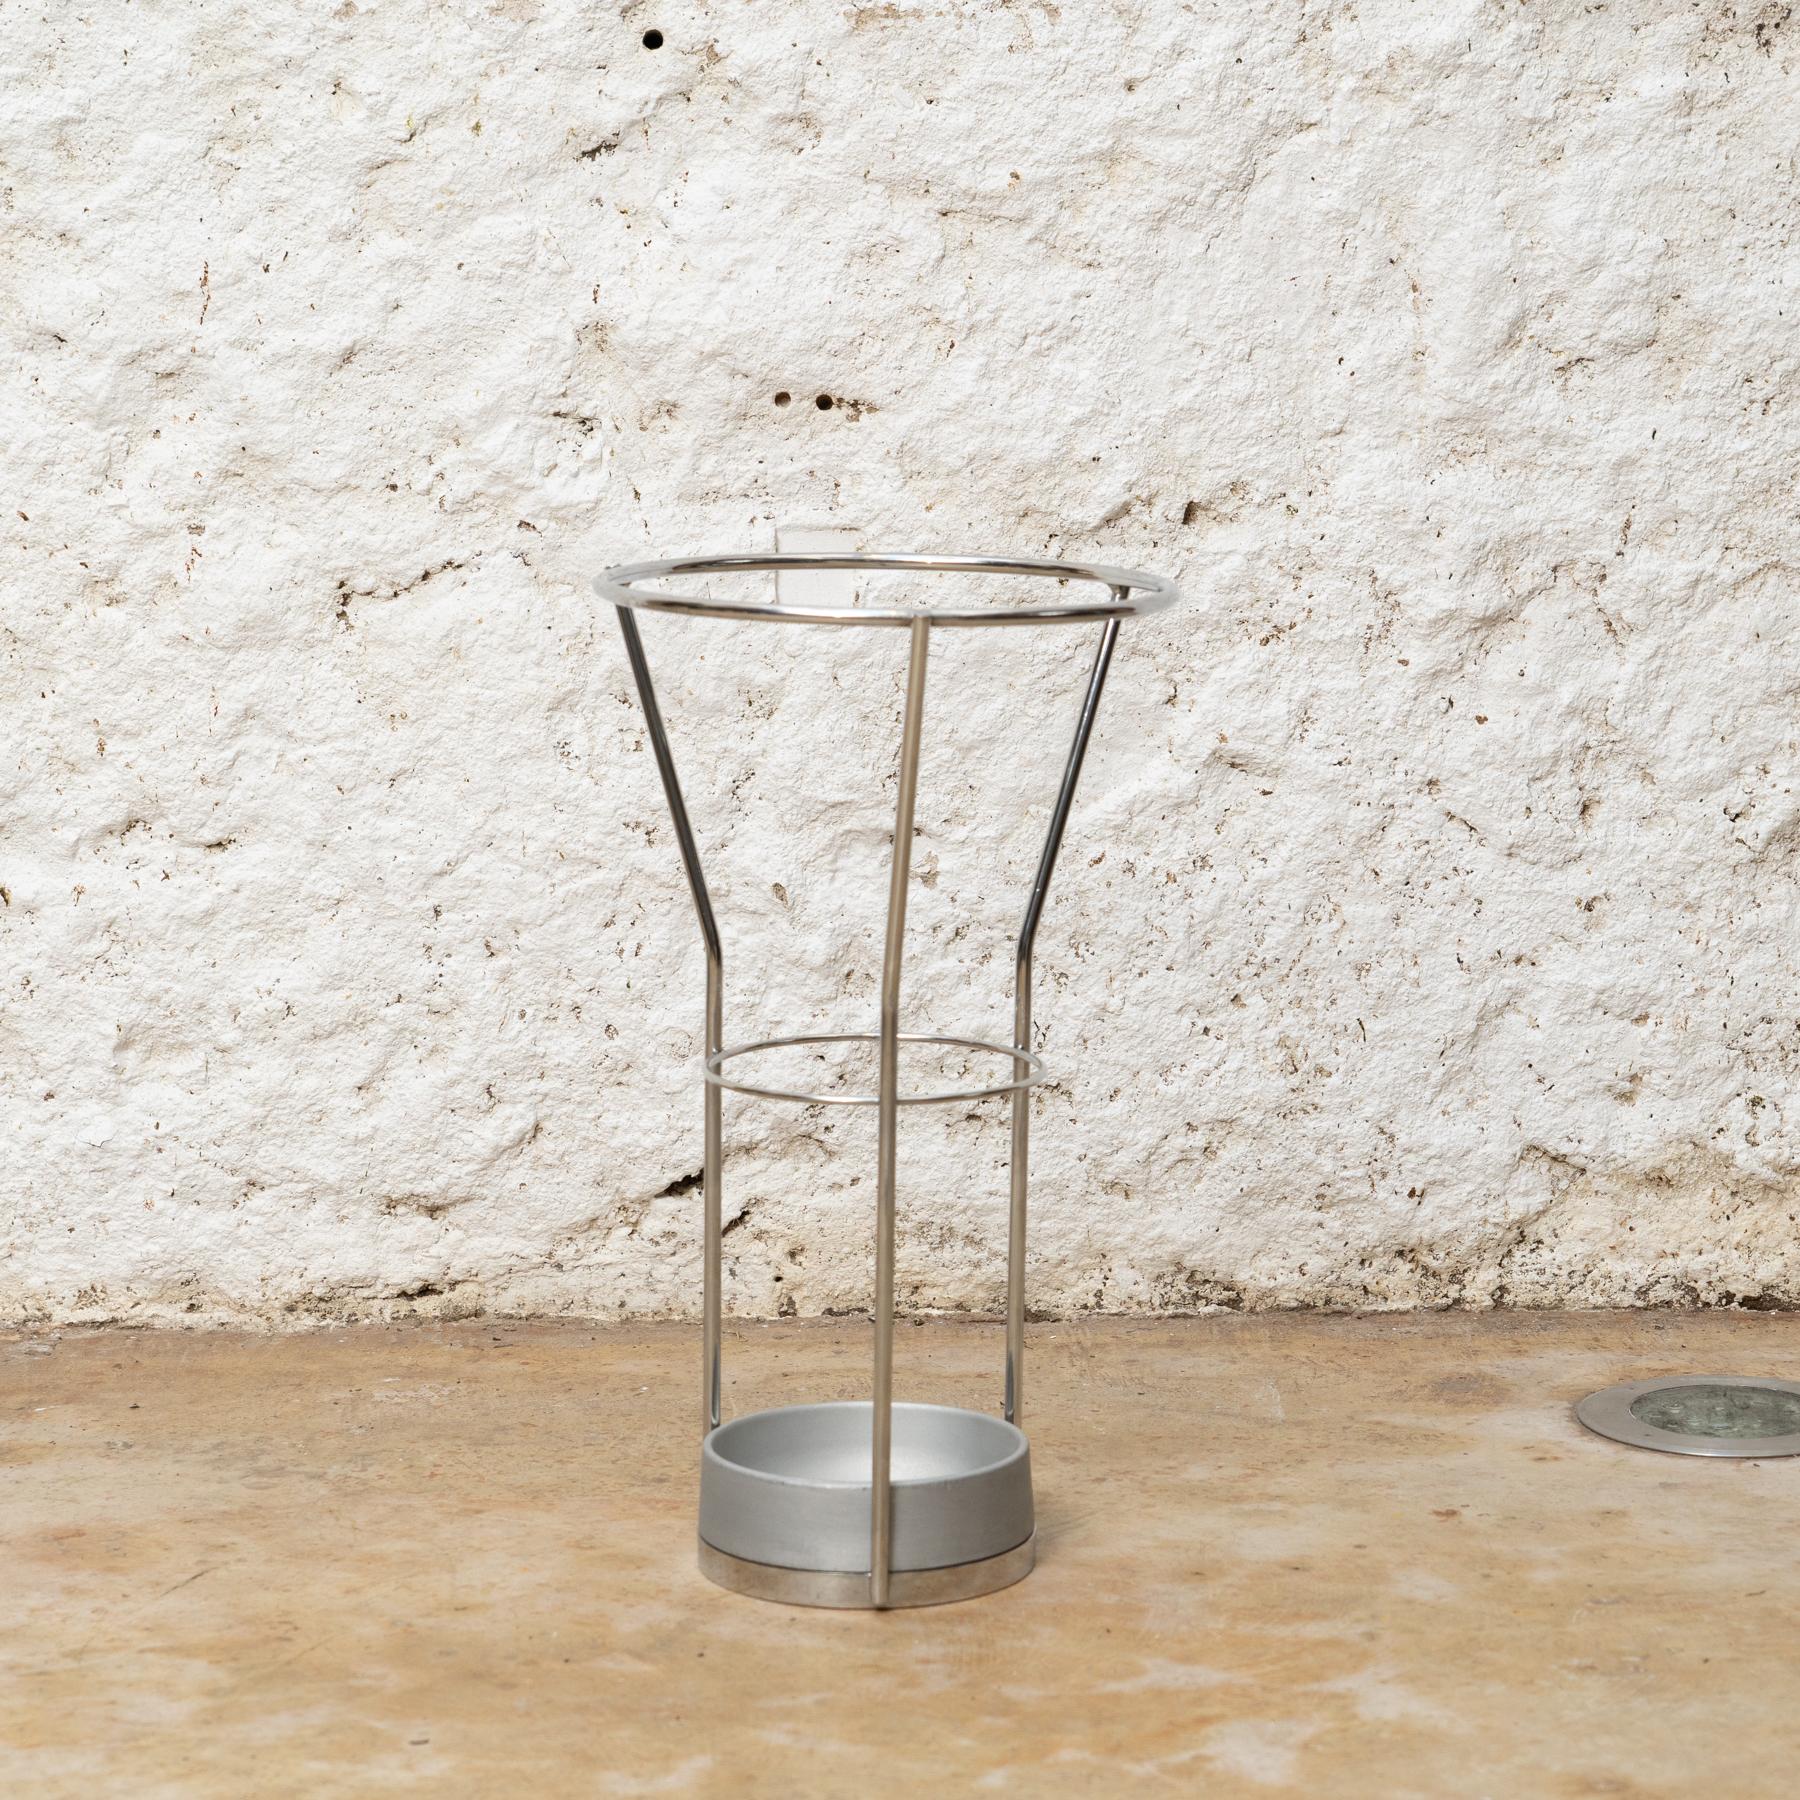 Umbrella Stand and Ashtray model Tomba’l.
Designed by Miguel Milà.
Manufactured by Misel·lania (Spain), circa 1989.

All made in metal.

In good original condotion, with minor wear consistent of age and use, preserving a beautiful patina.

With